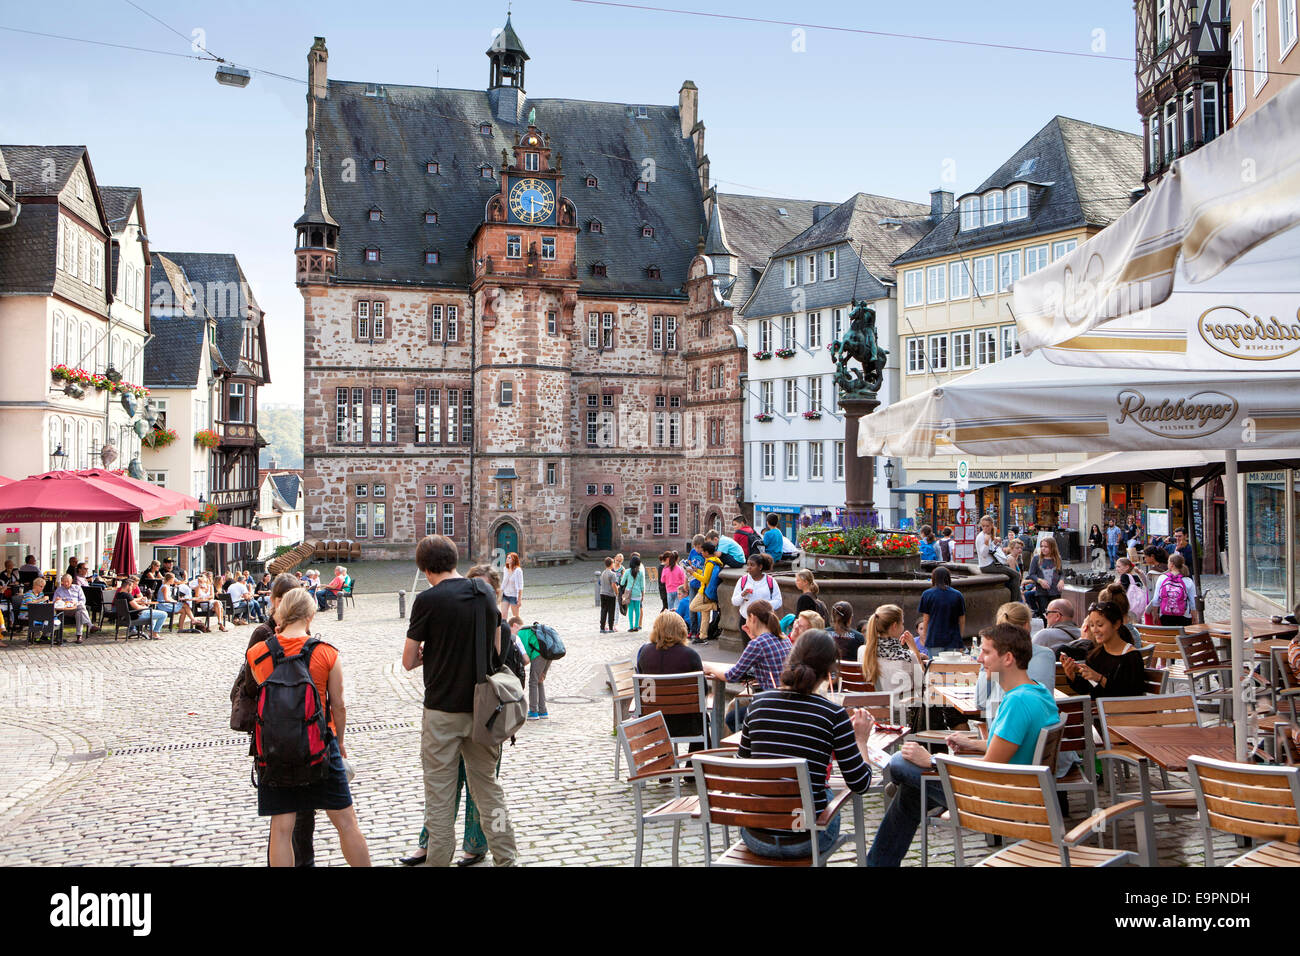 Historic Town Hall, market square, historic centre, Marburg, Hesse, Germany, Europe, Stock Photo